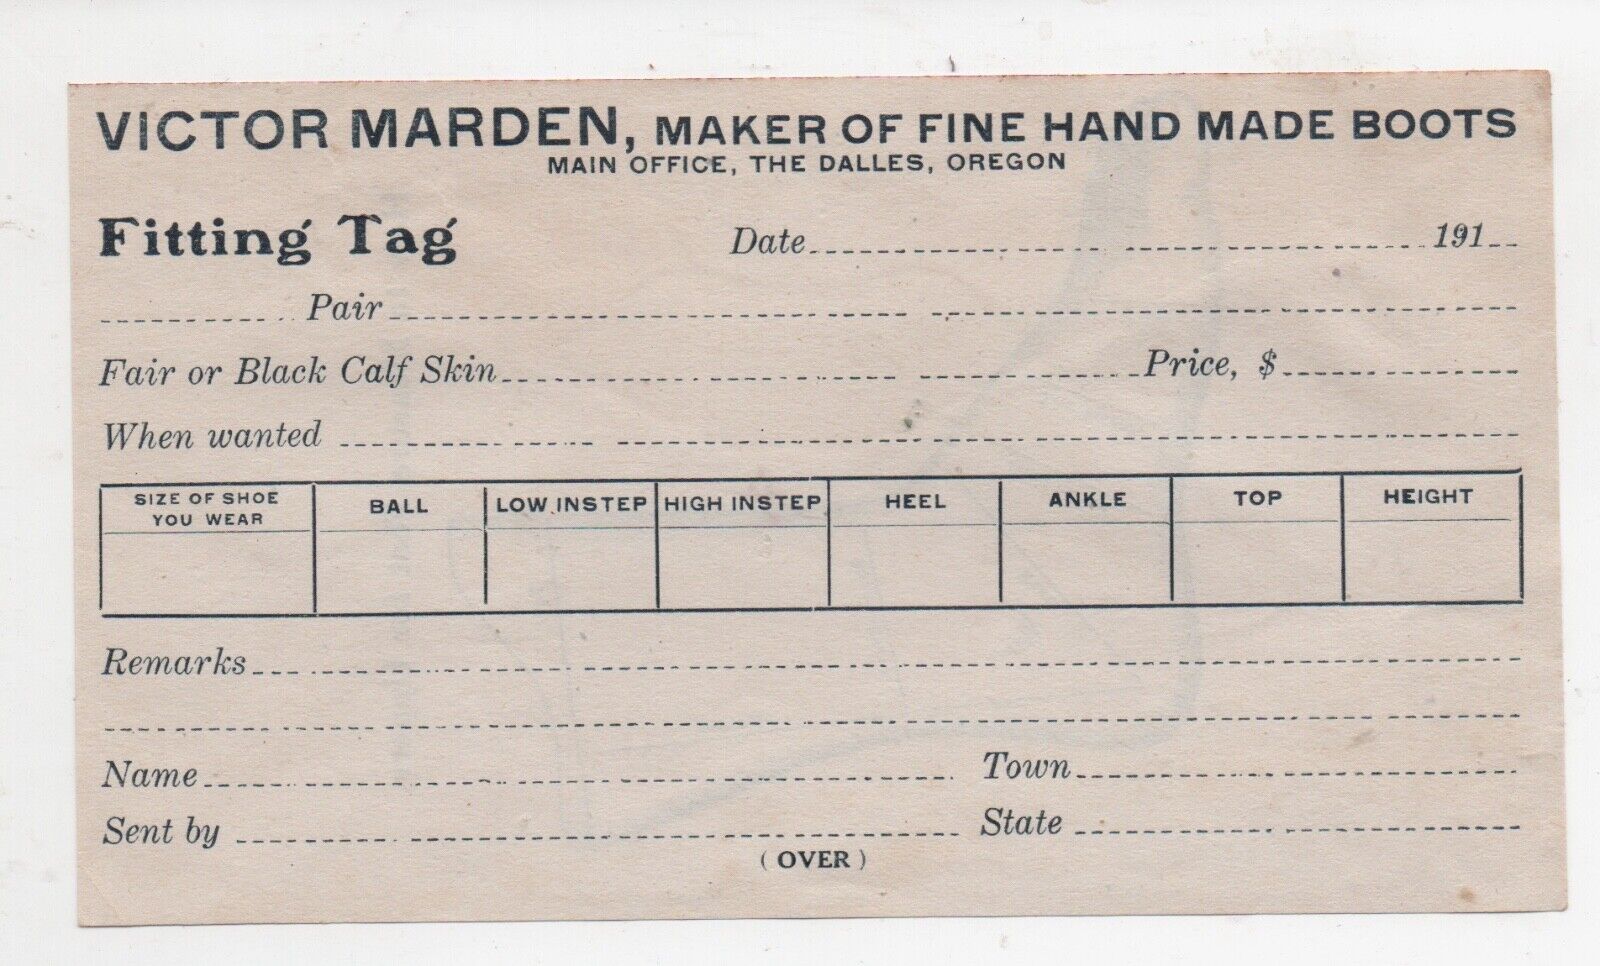 1910 Paper Fitting Tag Victor Marden Fine Boots The Dalles Oregon